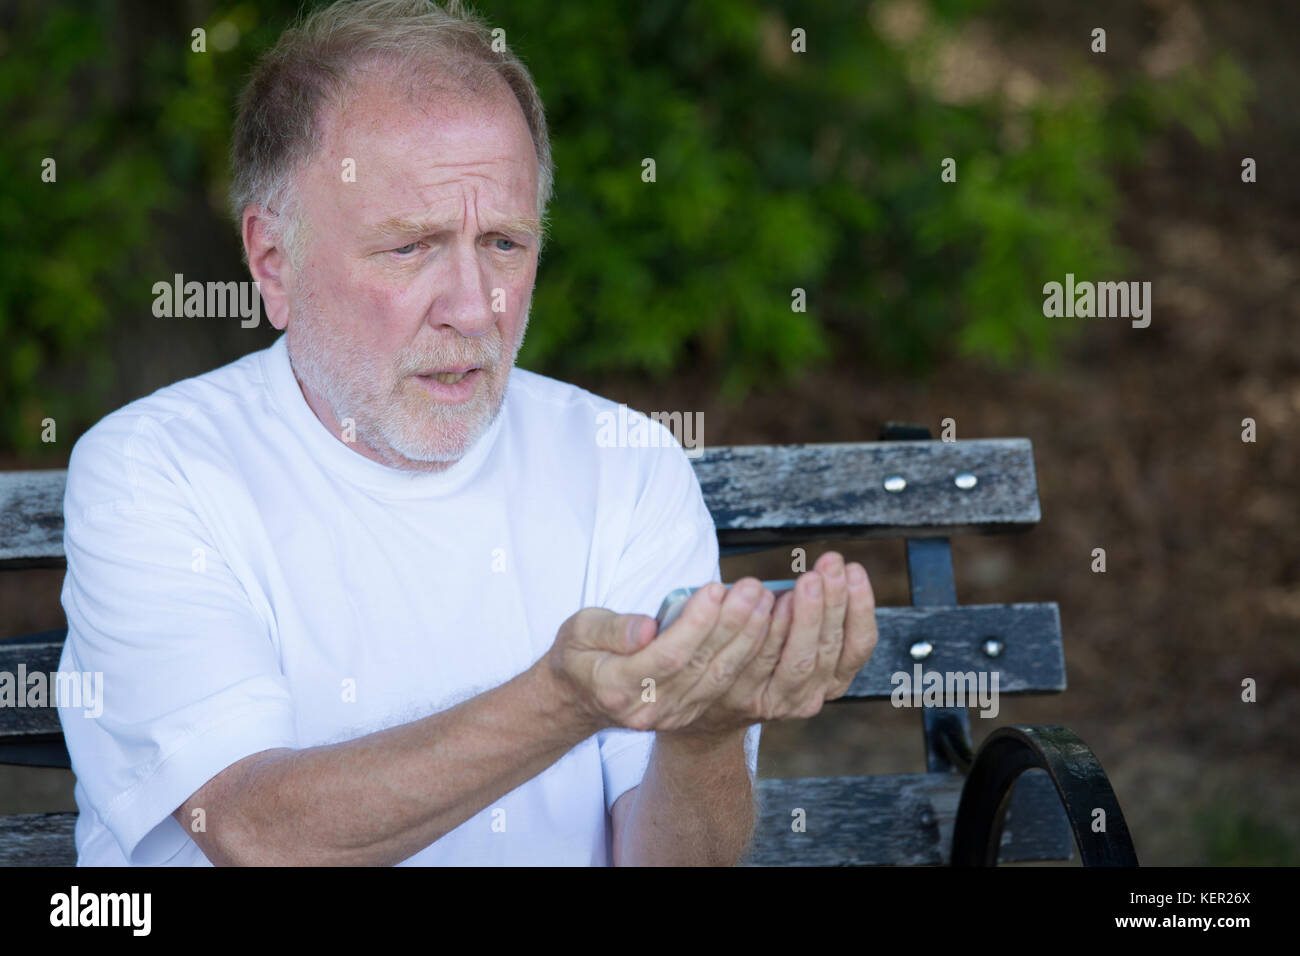 Closeup portrait of bold elderly man in white shirt, squinting, checking smartphone, sending text message, seated on a bench, isolated outdoor backgro Stock Photo